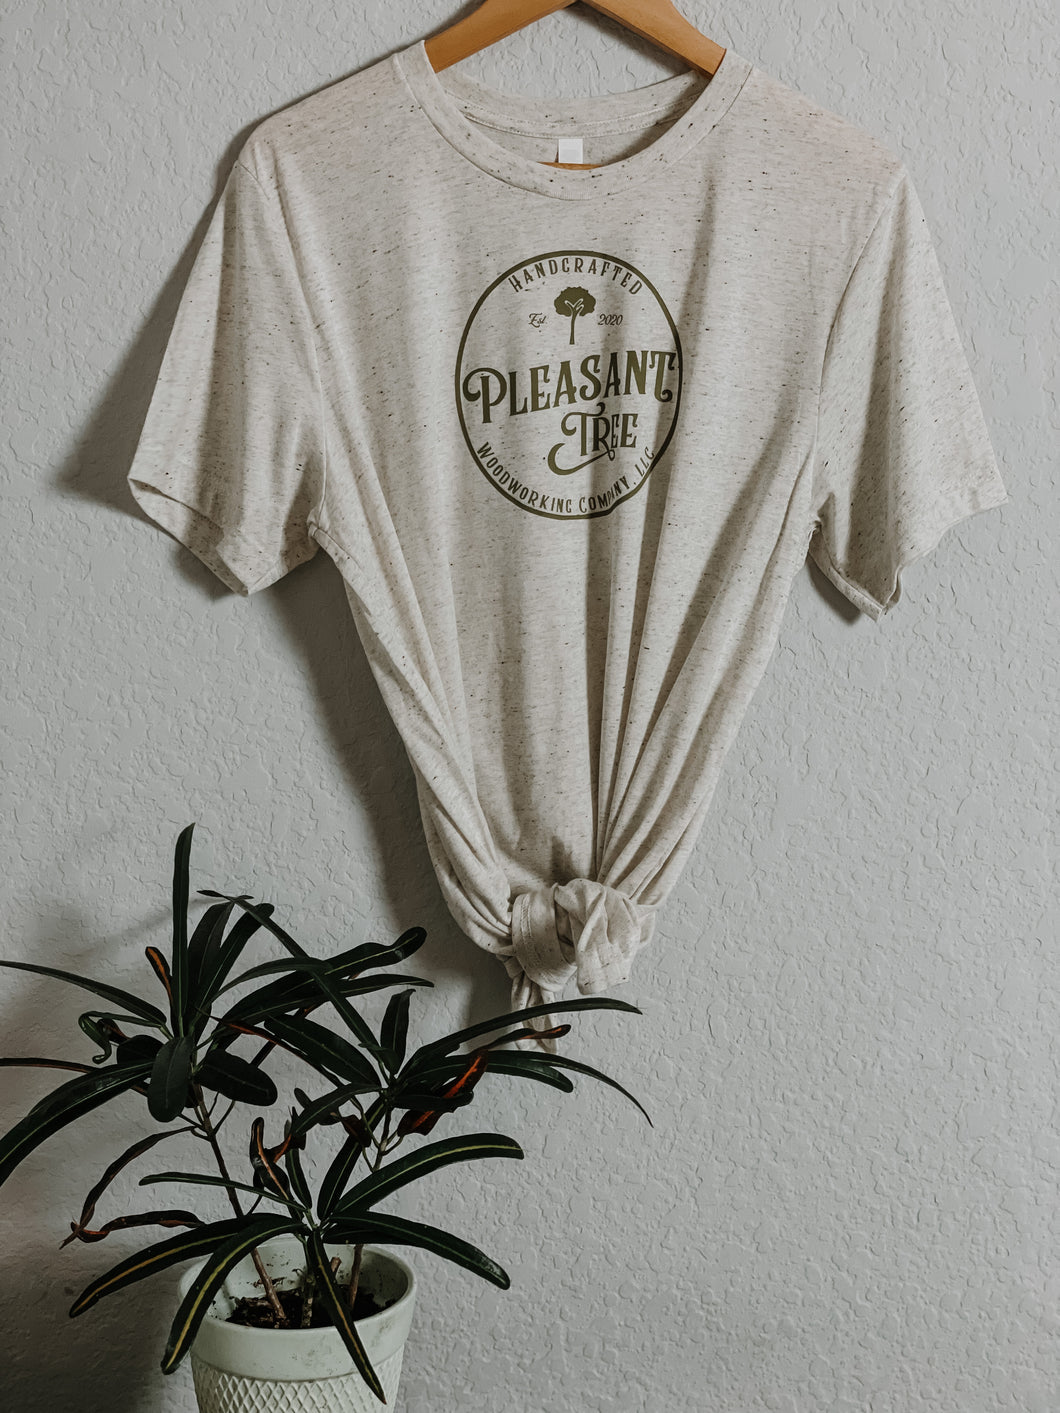 Oatmeal triblend tee with Pleasant Tree Woodworking Co. logo